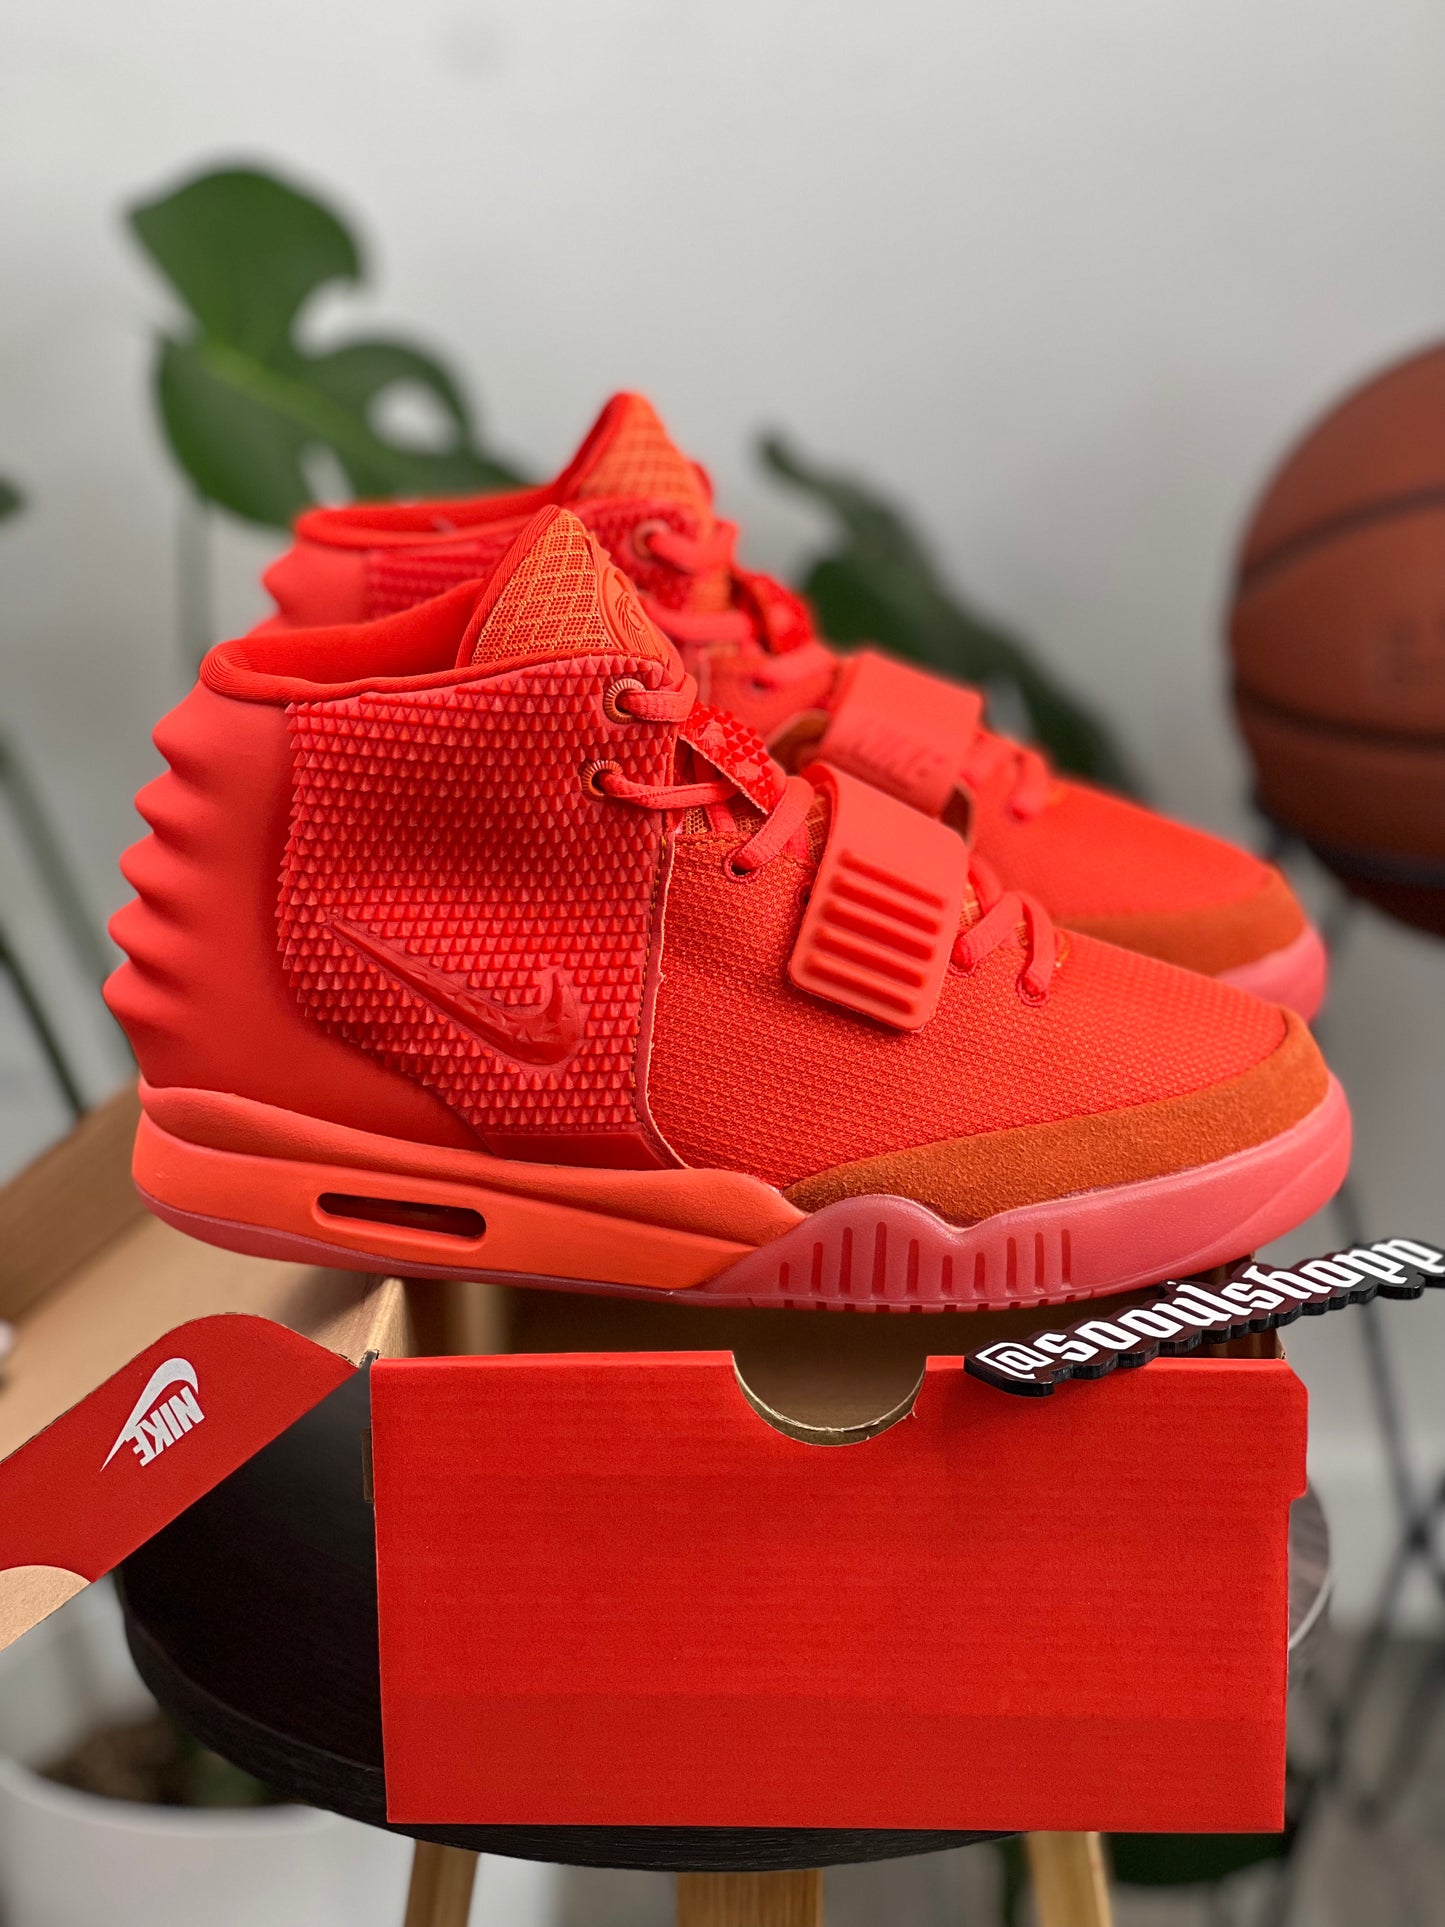 Nike Air Yeezy 2 SP RED